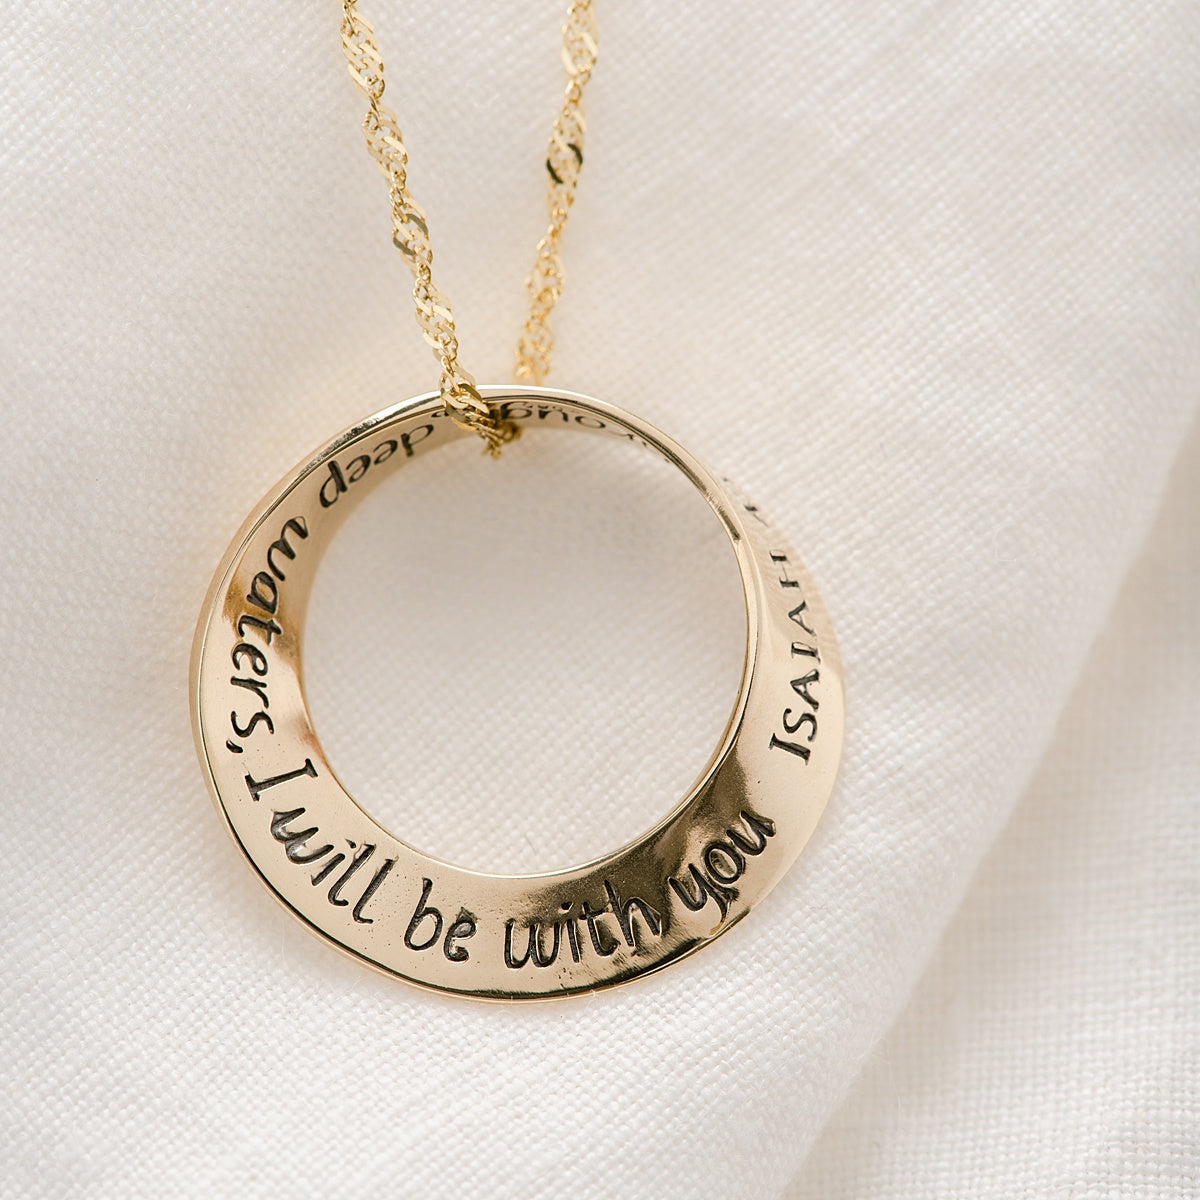 14k Gold Mobius Twist Pendant Necklace | When You Go Through Deep Waters | Isaiah 43:2